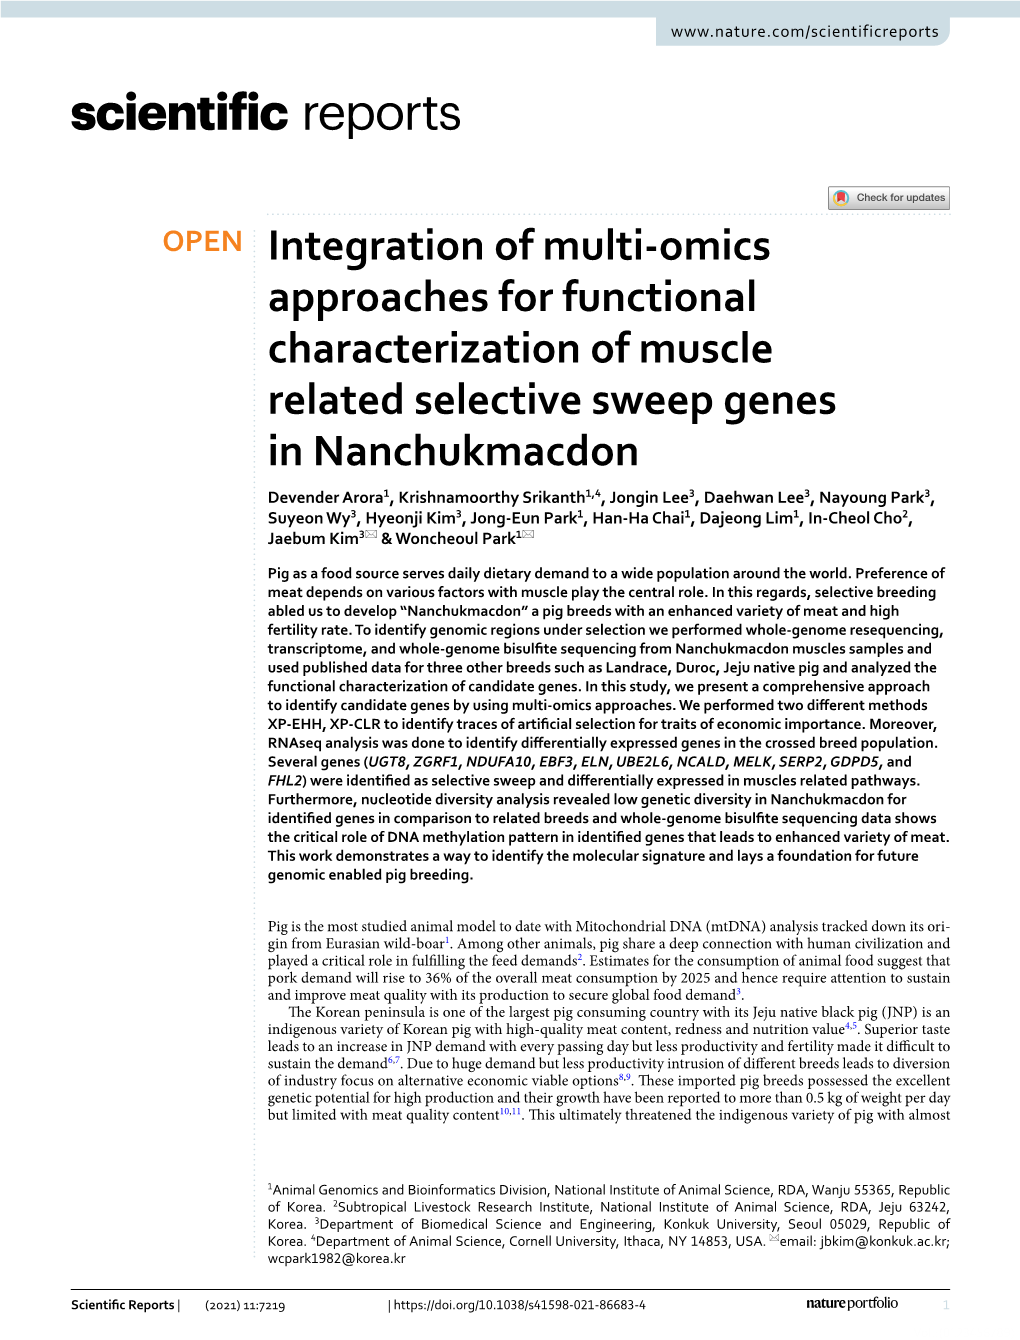 Integration of Multi-Omics Approaches for Functional Characterization Of